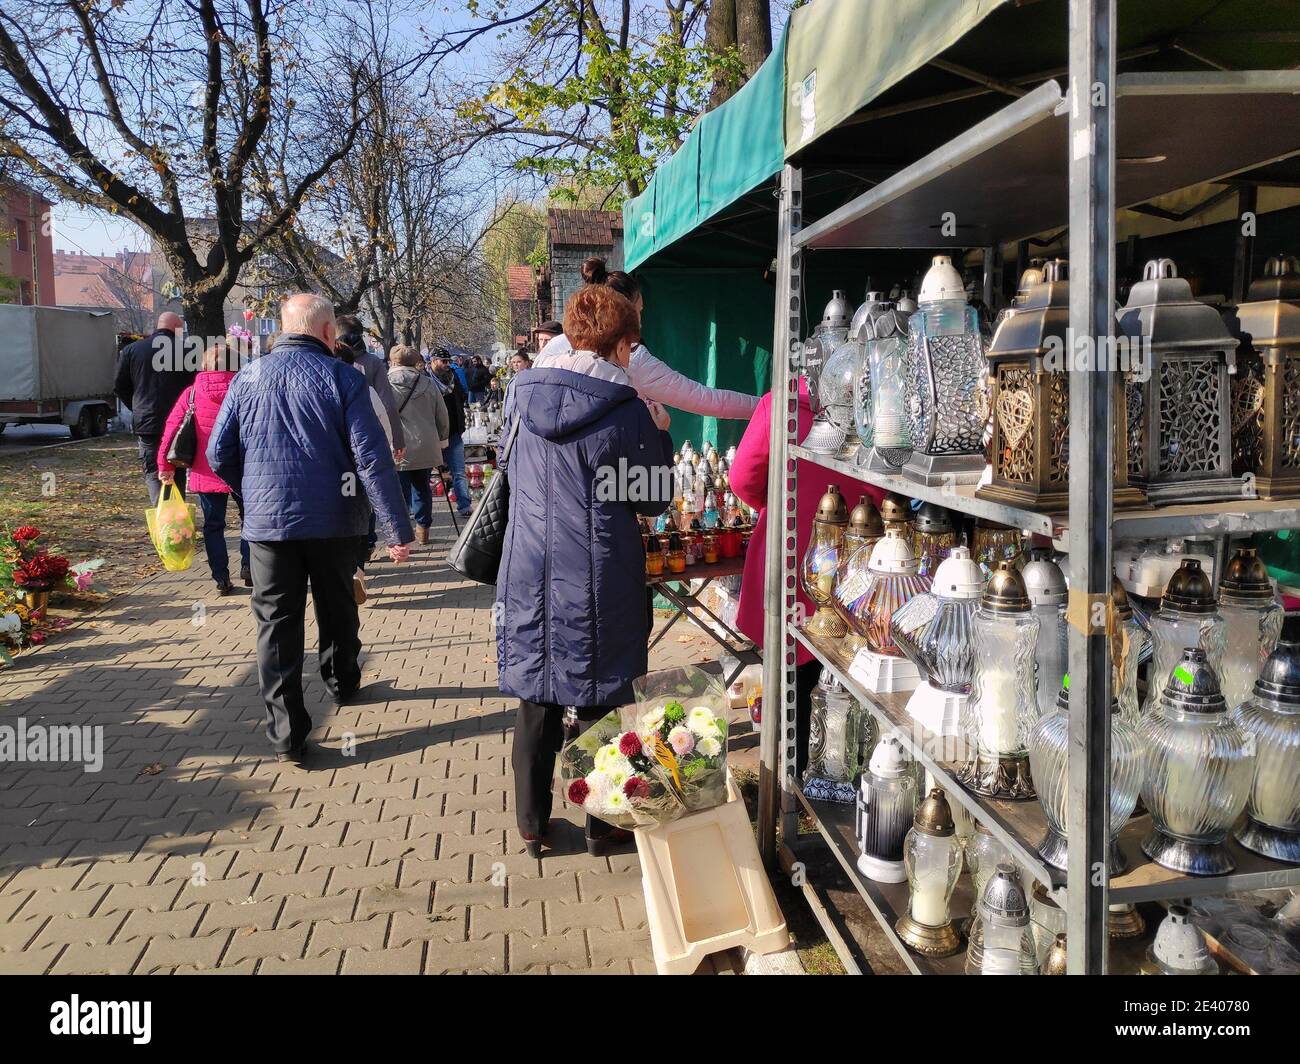 BYTOM, POLAND - NOVEMBER 1, 2019: People buy grave candles during All Saints Day in Bytom. All Saints Day celebrations at cemeteries is one of most im Stock Photo